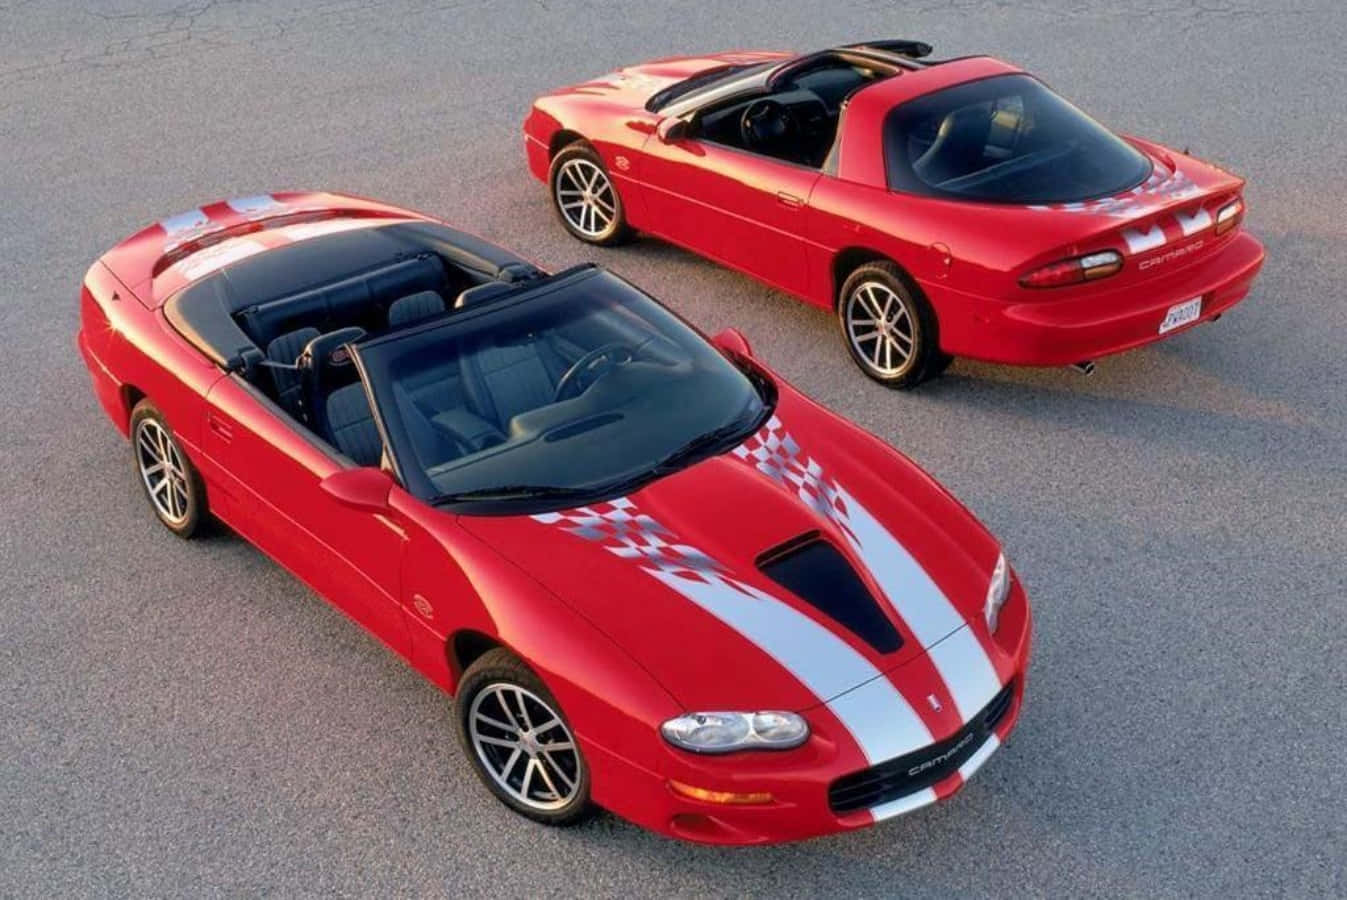 Two Red Sports Cars Are Shown Side By Side